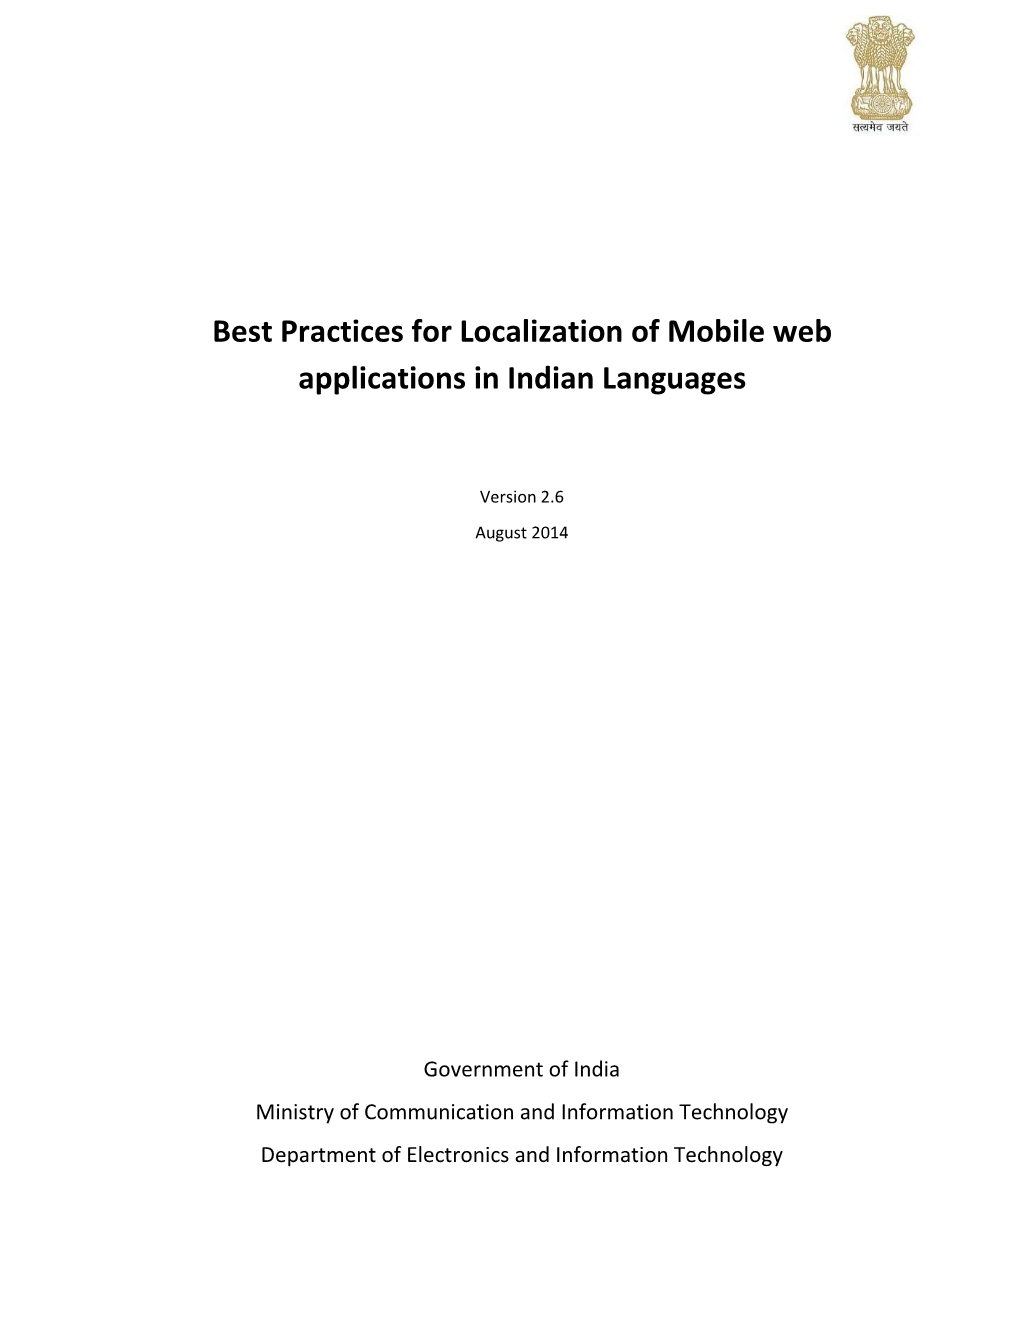 Best Practices for Localization of Mobile Web Applications in Indian Languages